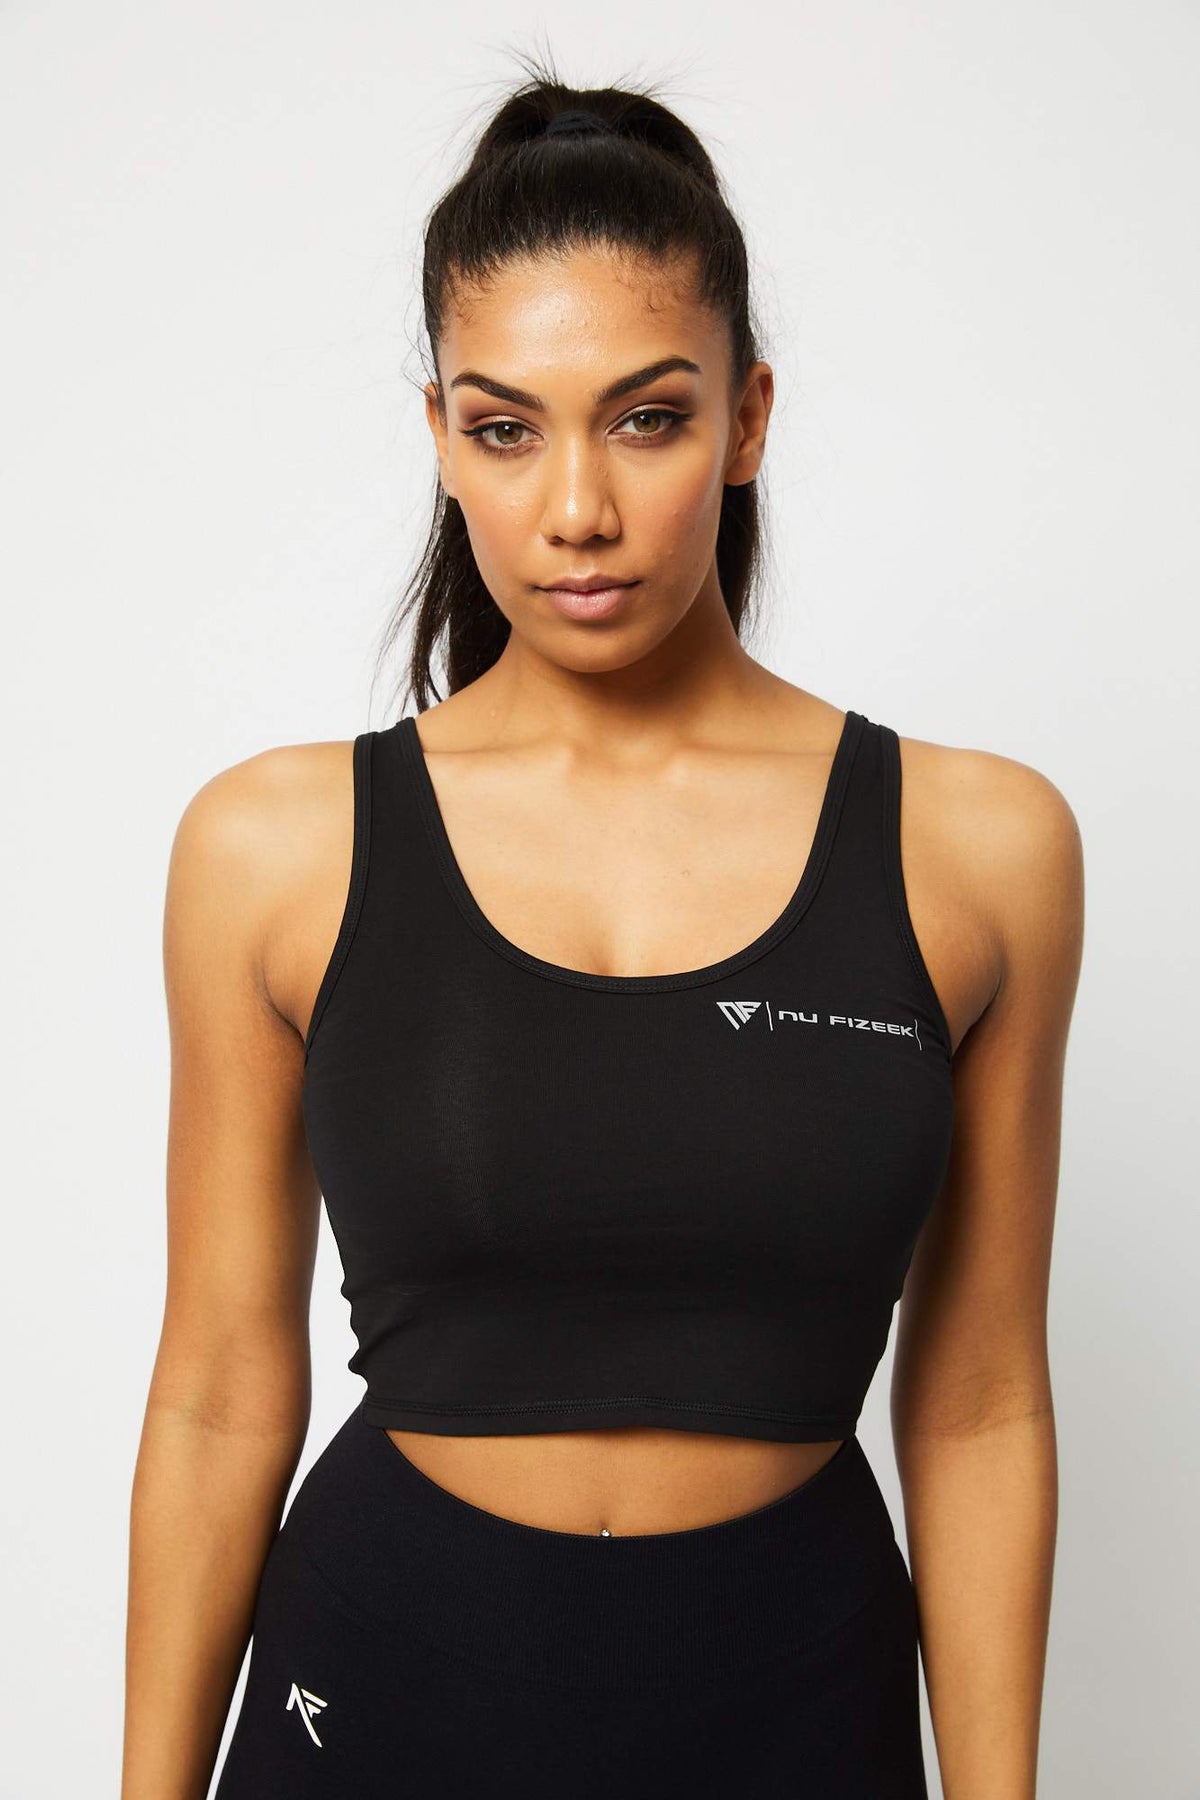 Basic finds France- Ukraine Women's Padded Sports Bra XS, Black : Basic  finds: : Clothing, Shoes & Accessories